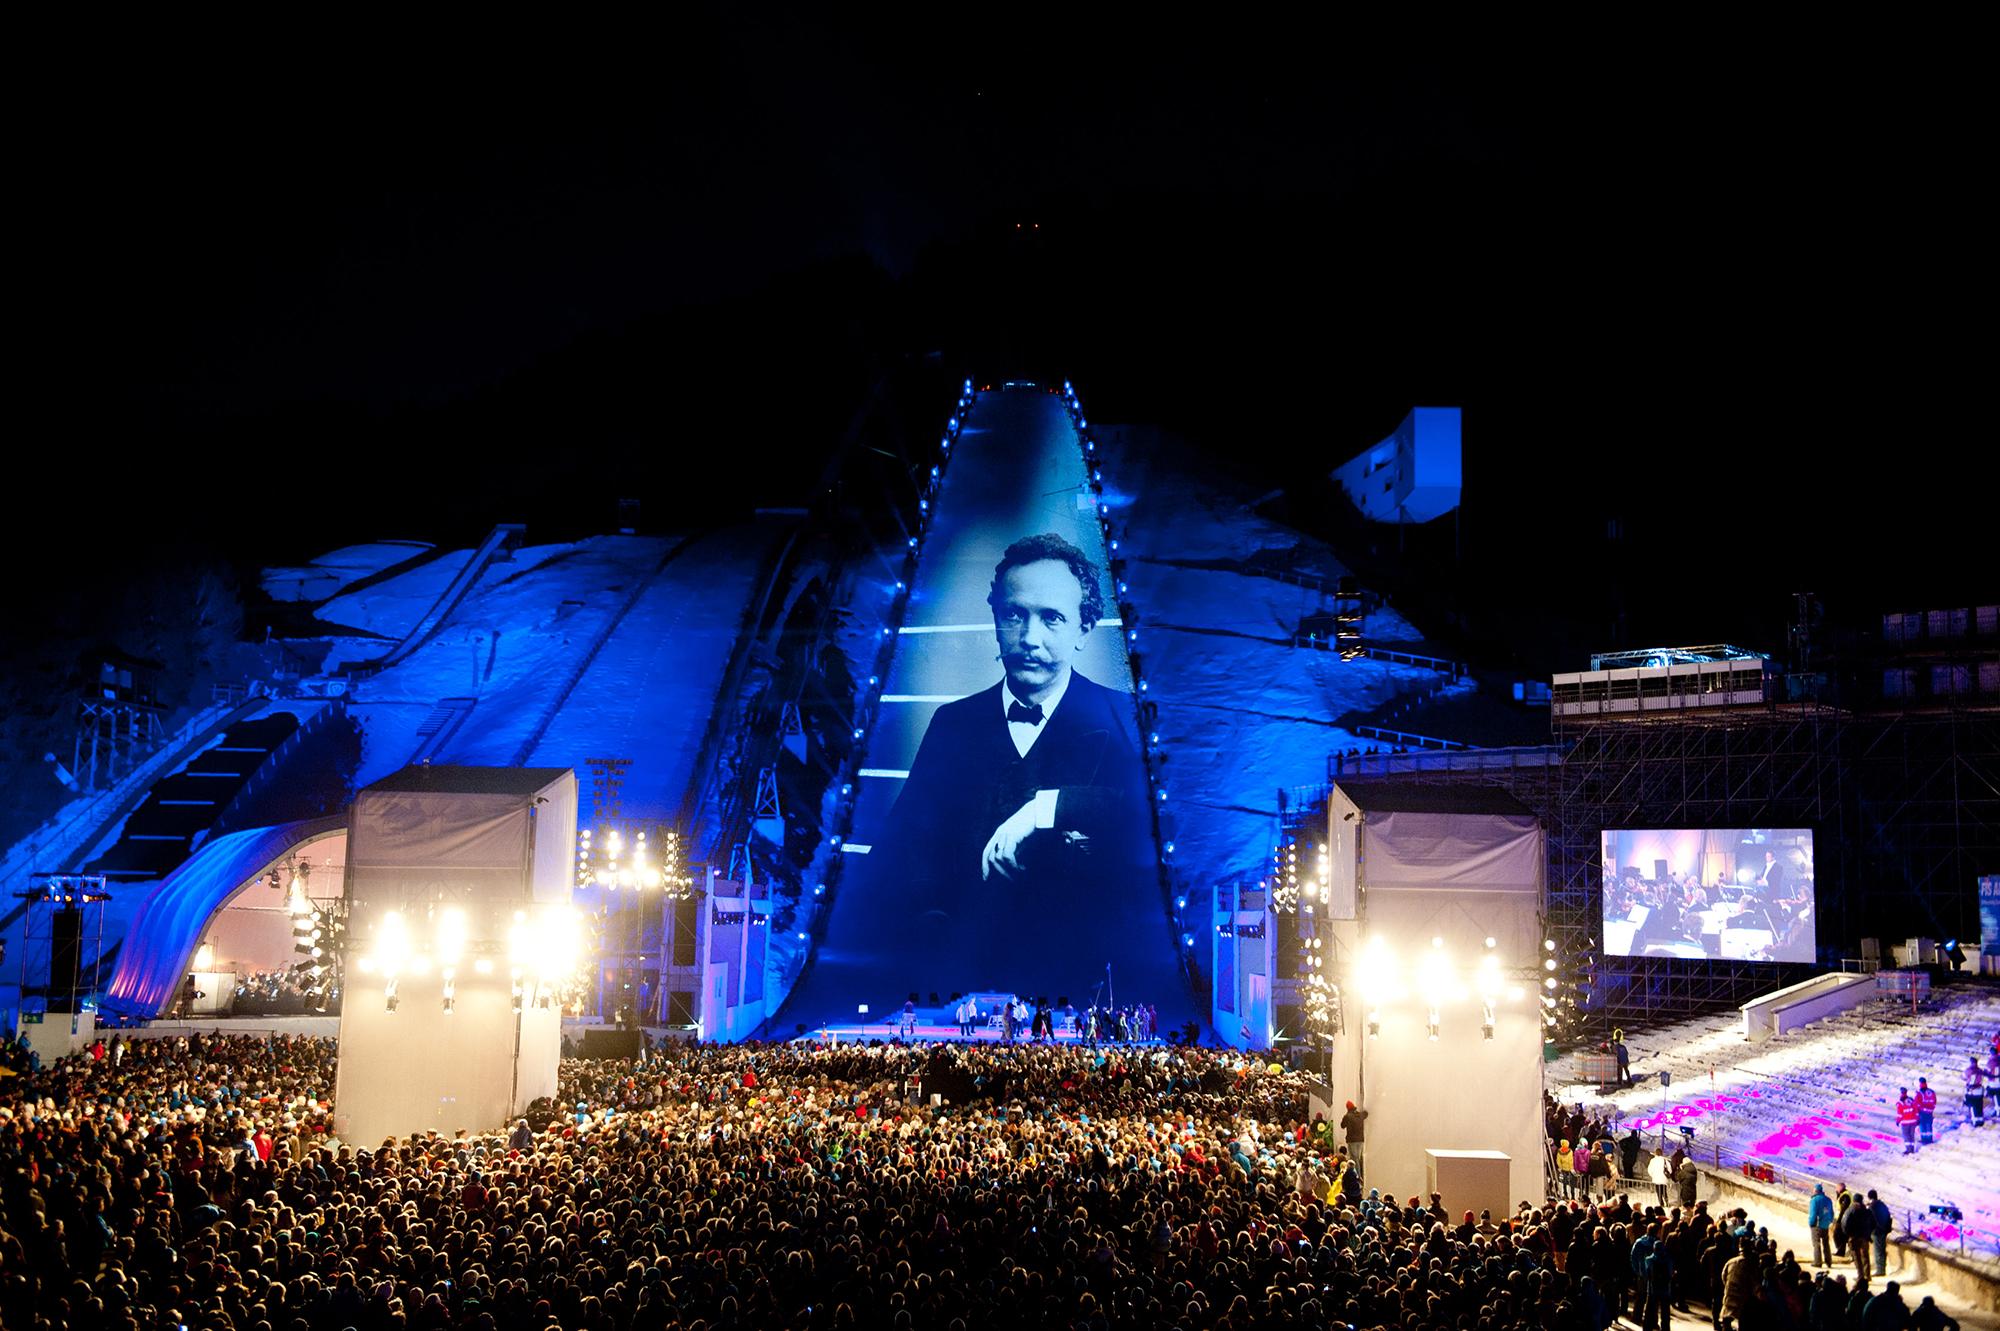 An old photo is projection mapped onto the ski slope as a sea of people looks on.